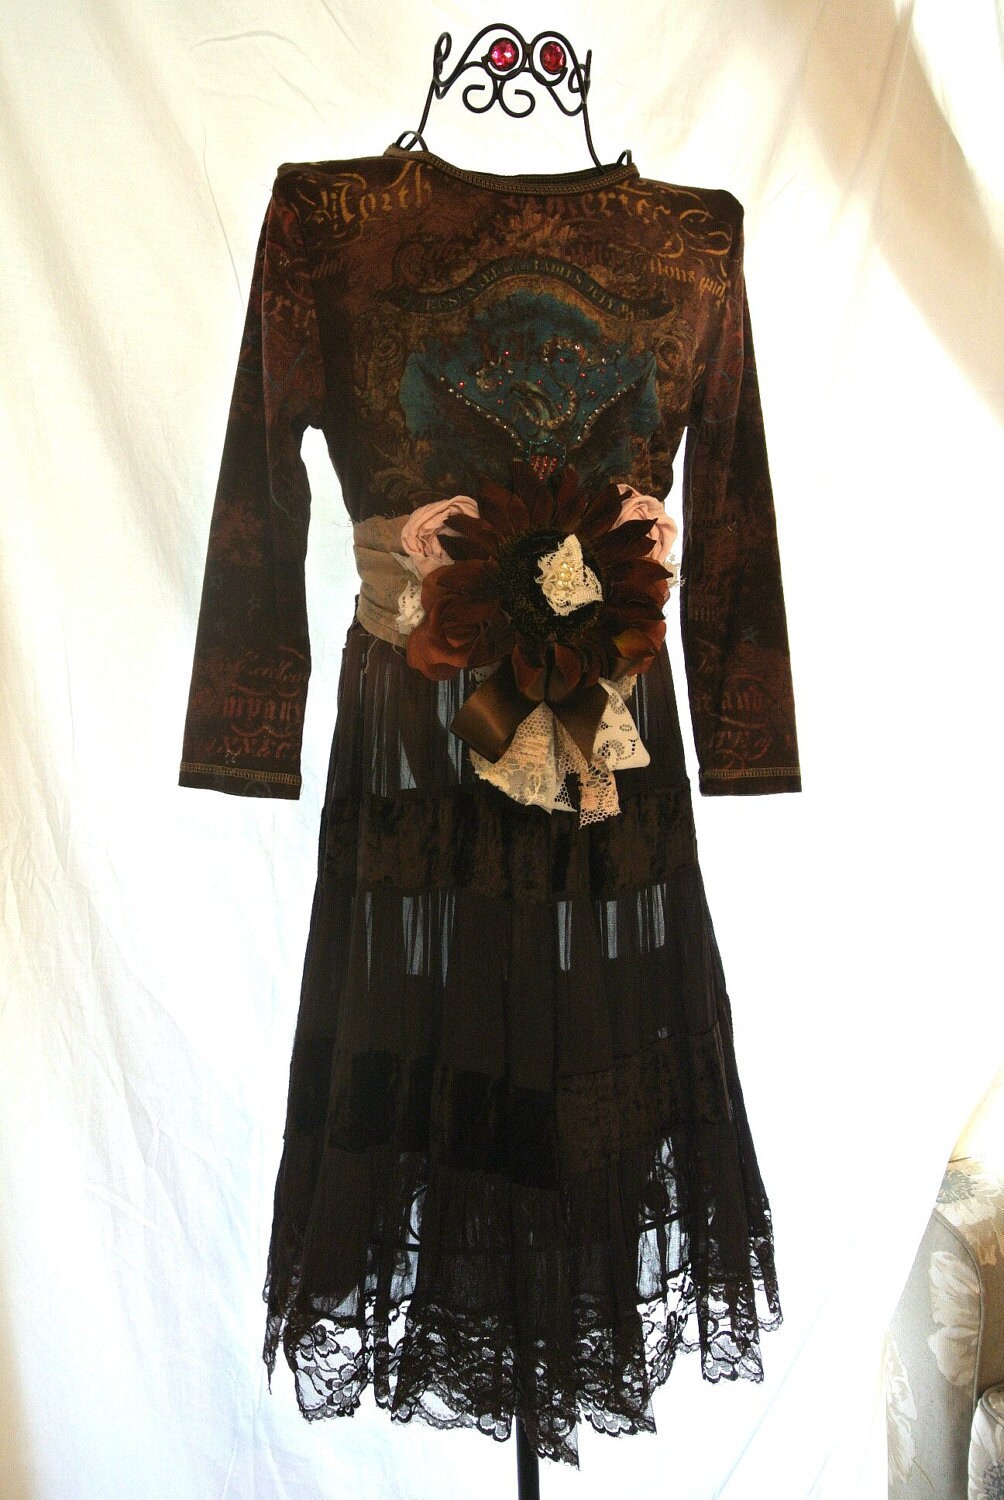 Cowgirl Glam Lace dress gypsy rose brown western sheer